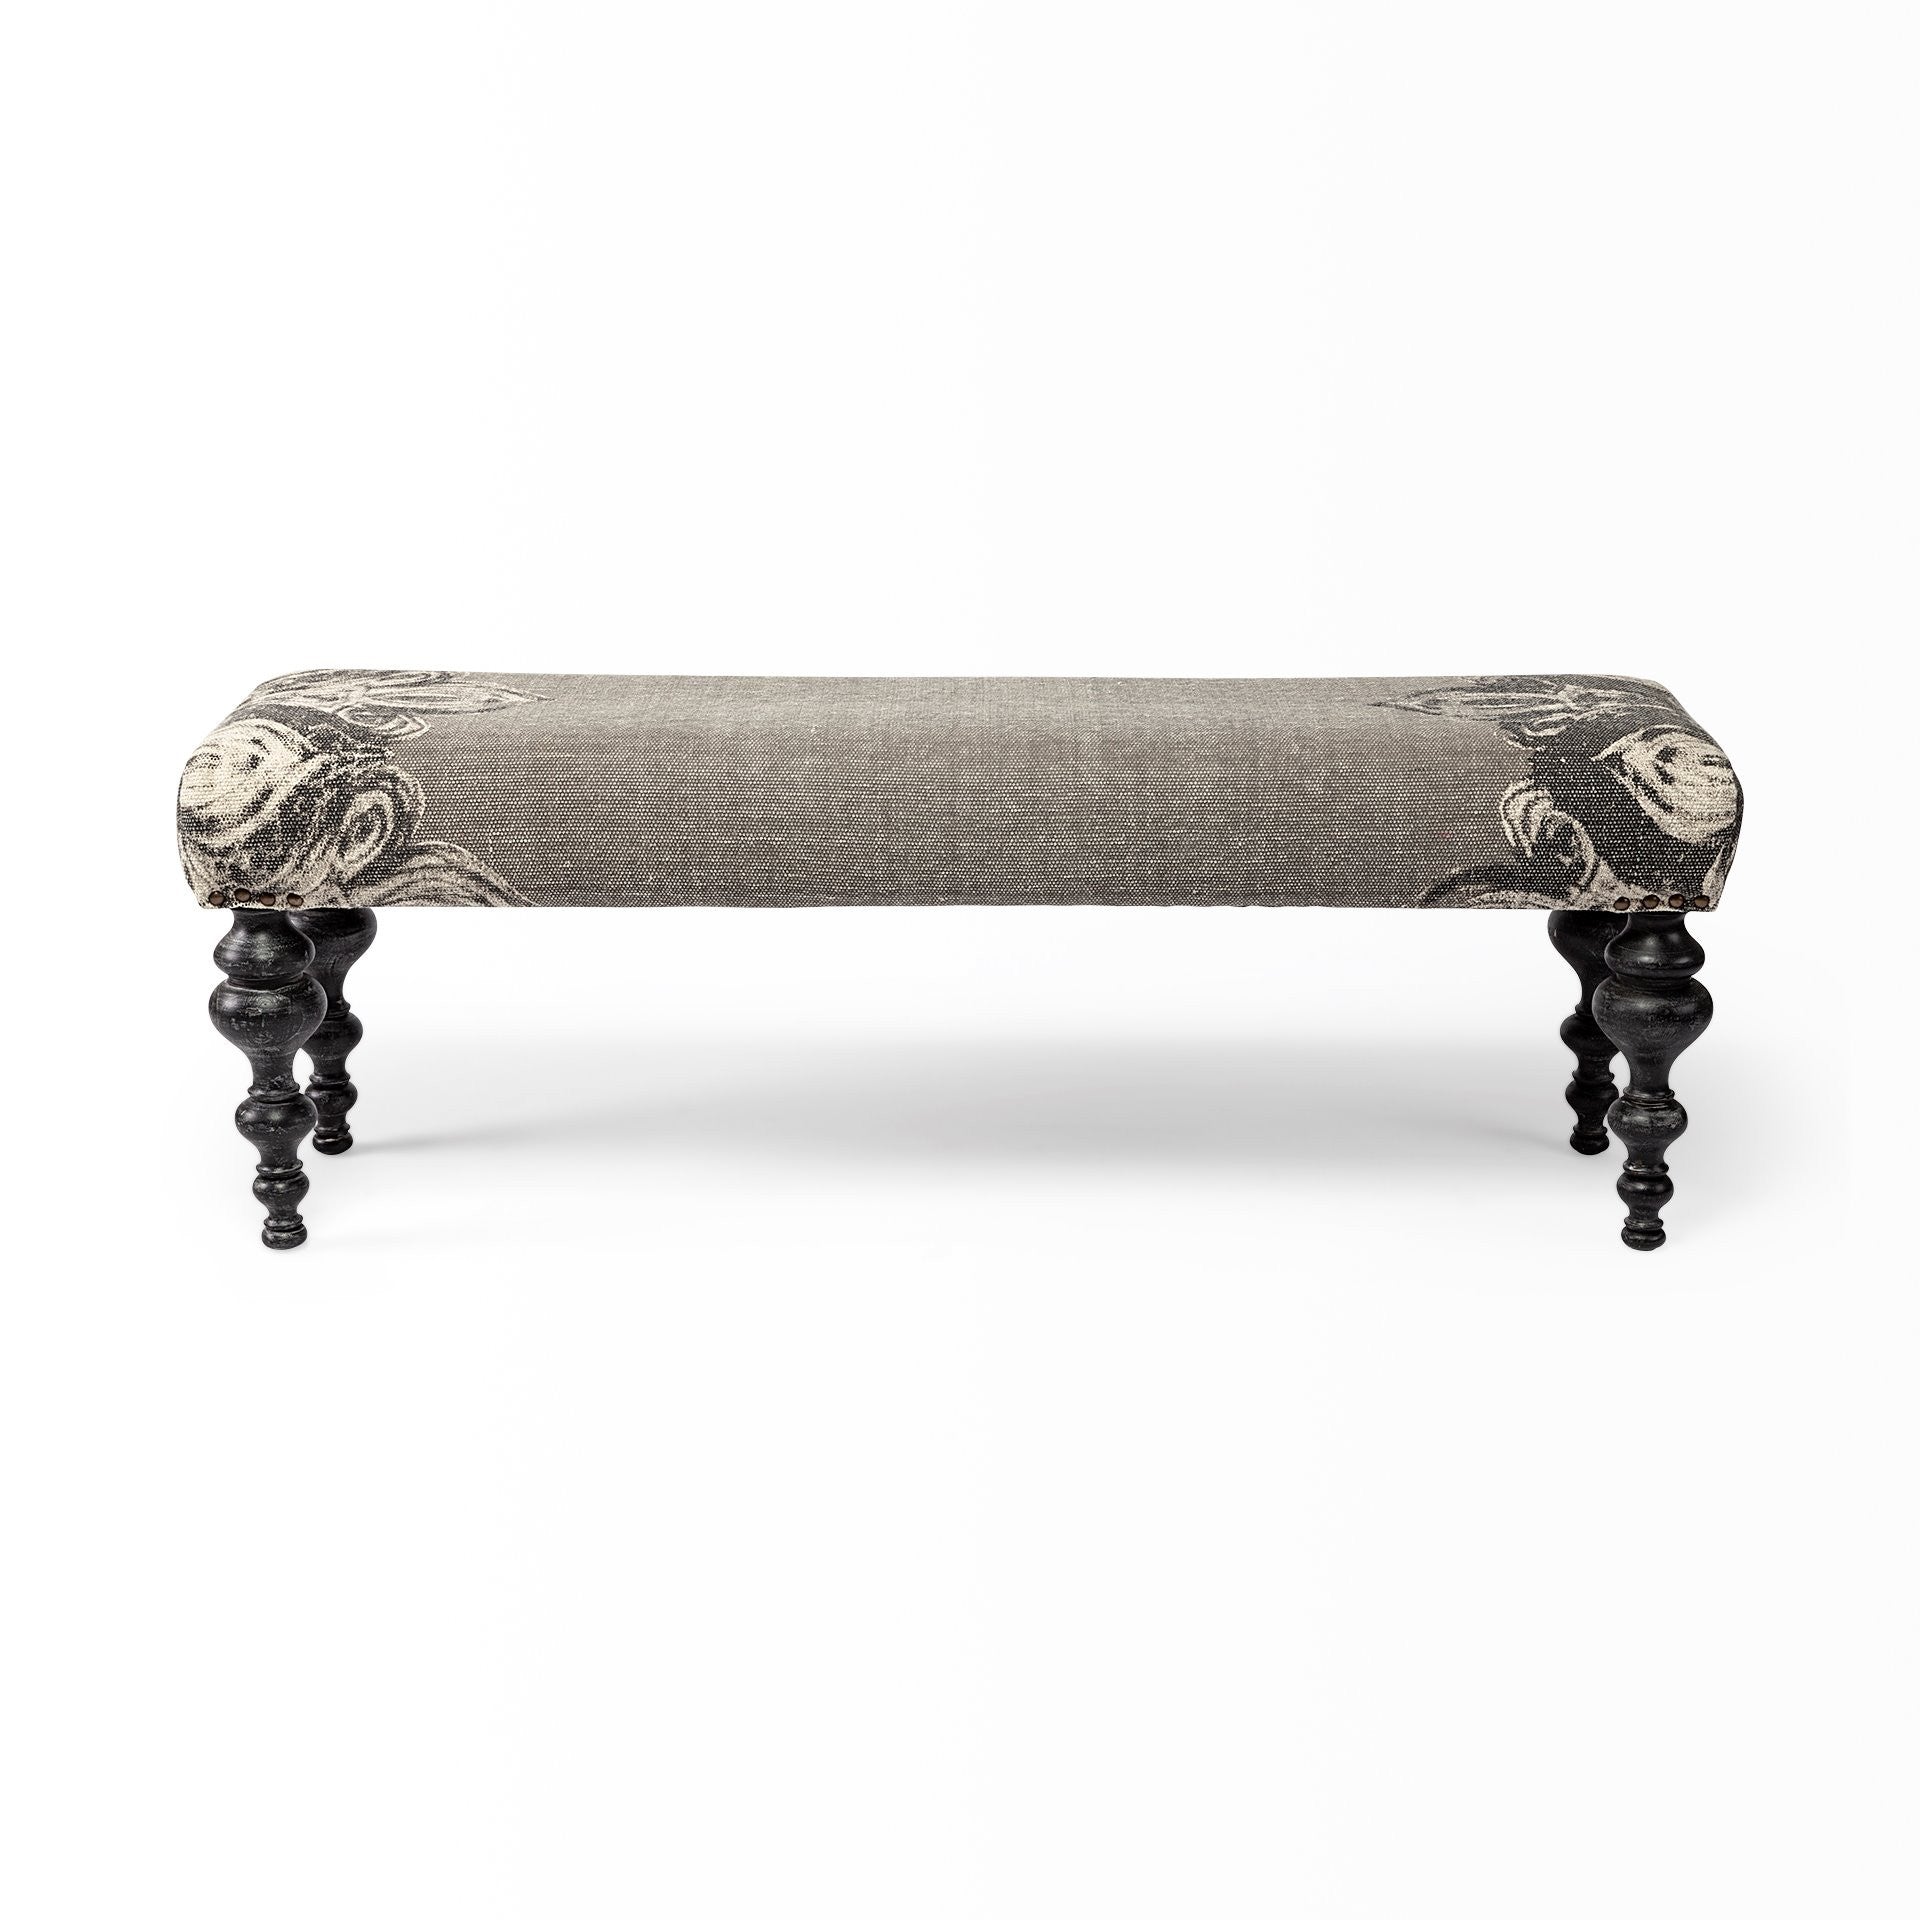 14" Gray And Dark Brown Upholstered Cotton Blend Bench